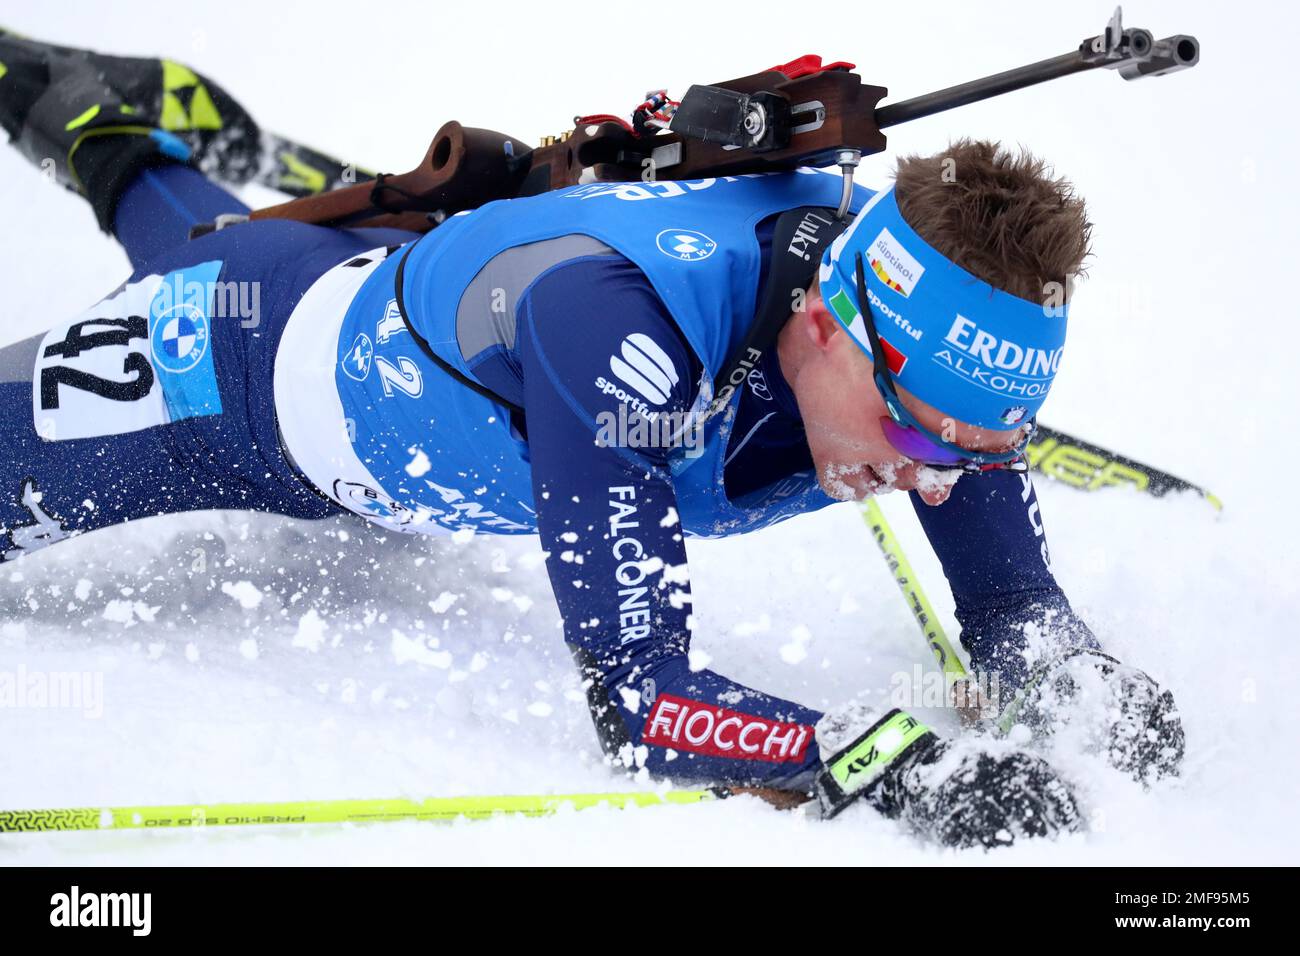 Fourth placed Lukas Hofer of Italy falls after crossing the finish line  during the men's 20km individual race at the Biathlon World Cup in  Anterselva, Italy, Friday, Jan. 22, 2021. (AP Photo/Matthias